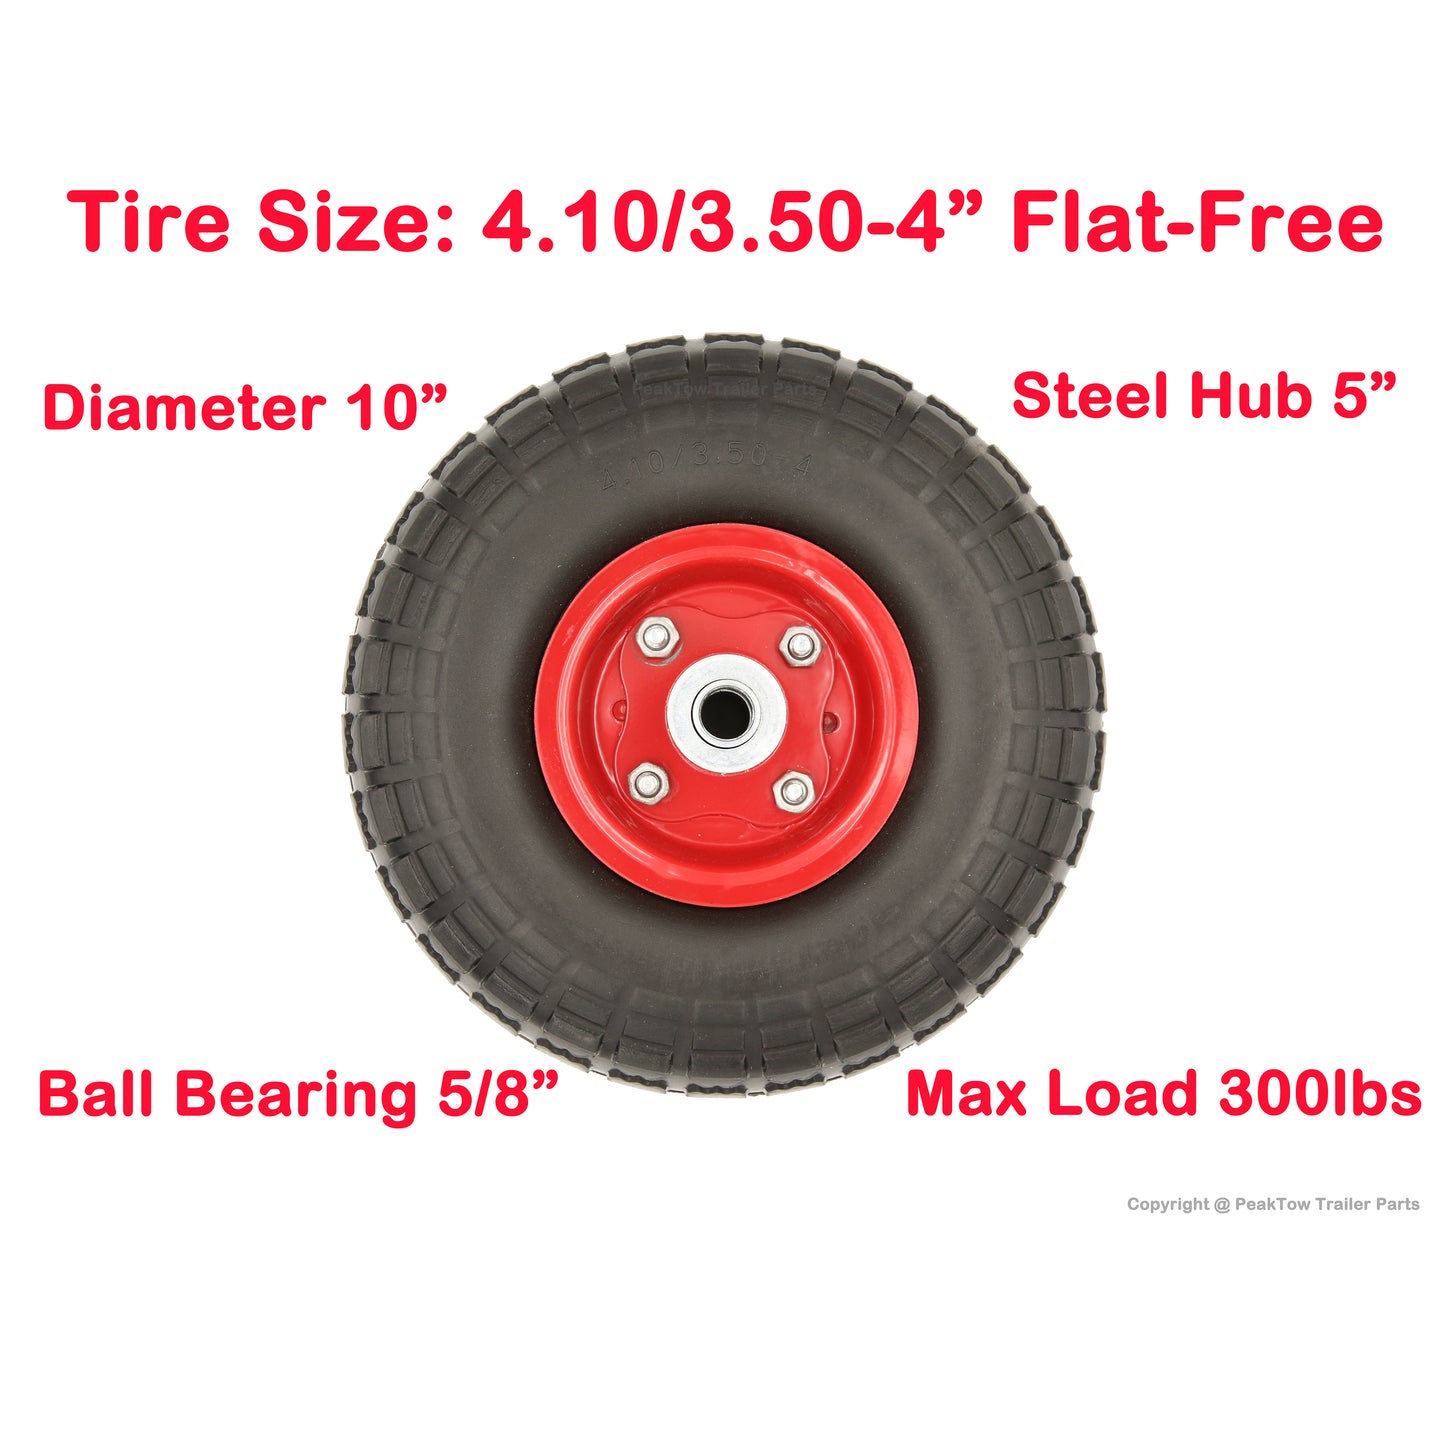 PTR0004 10 Inch Flat Free Solid 4.10/3.50-4" Tire on Wheel for Dolly Handtruck Cart - Case of 12